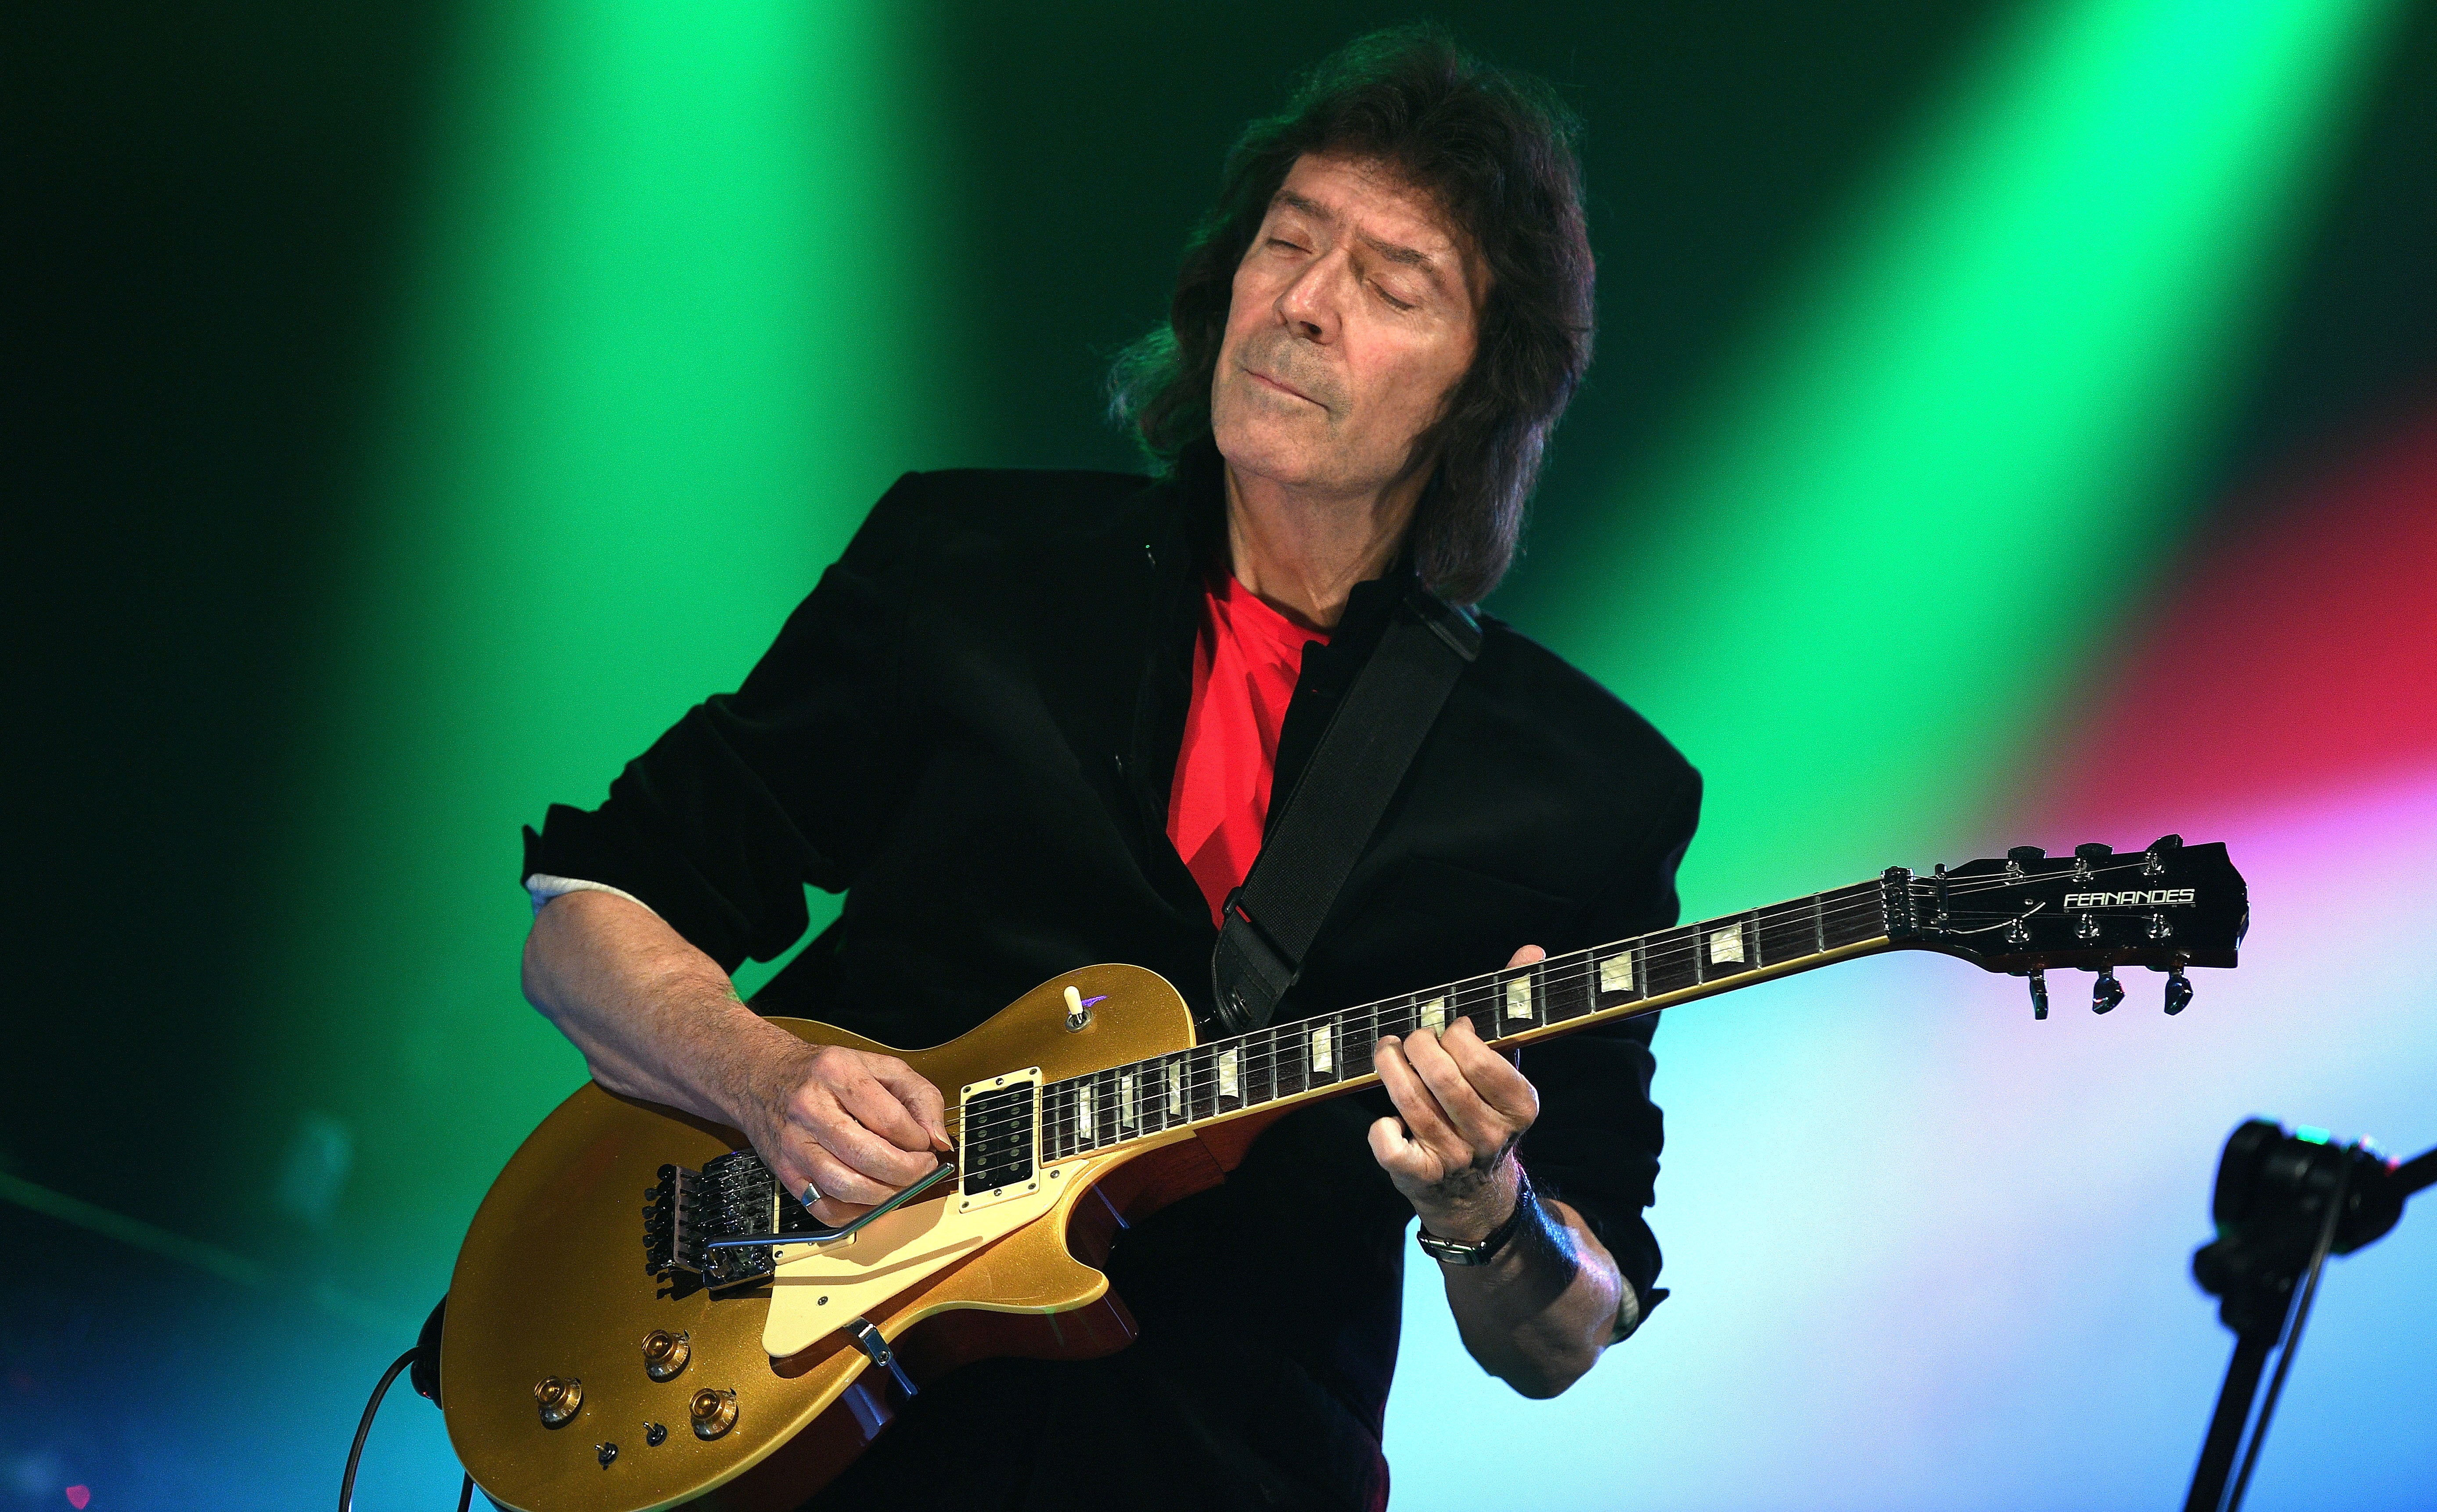 members only presale code to An Evening with Steve Hackett: Genesis Revisited, Foxtrot at 50 & More face value tickets in Des Moines at Hoyt Sherman Place